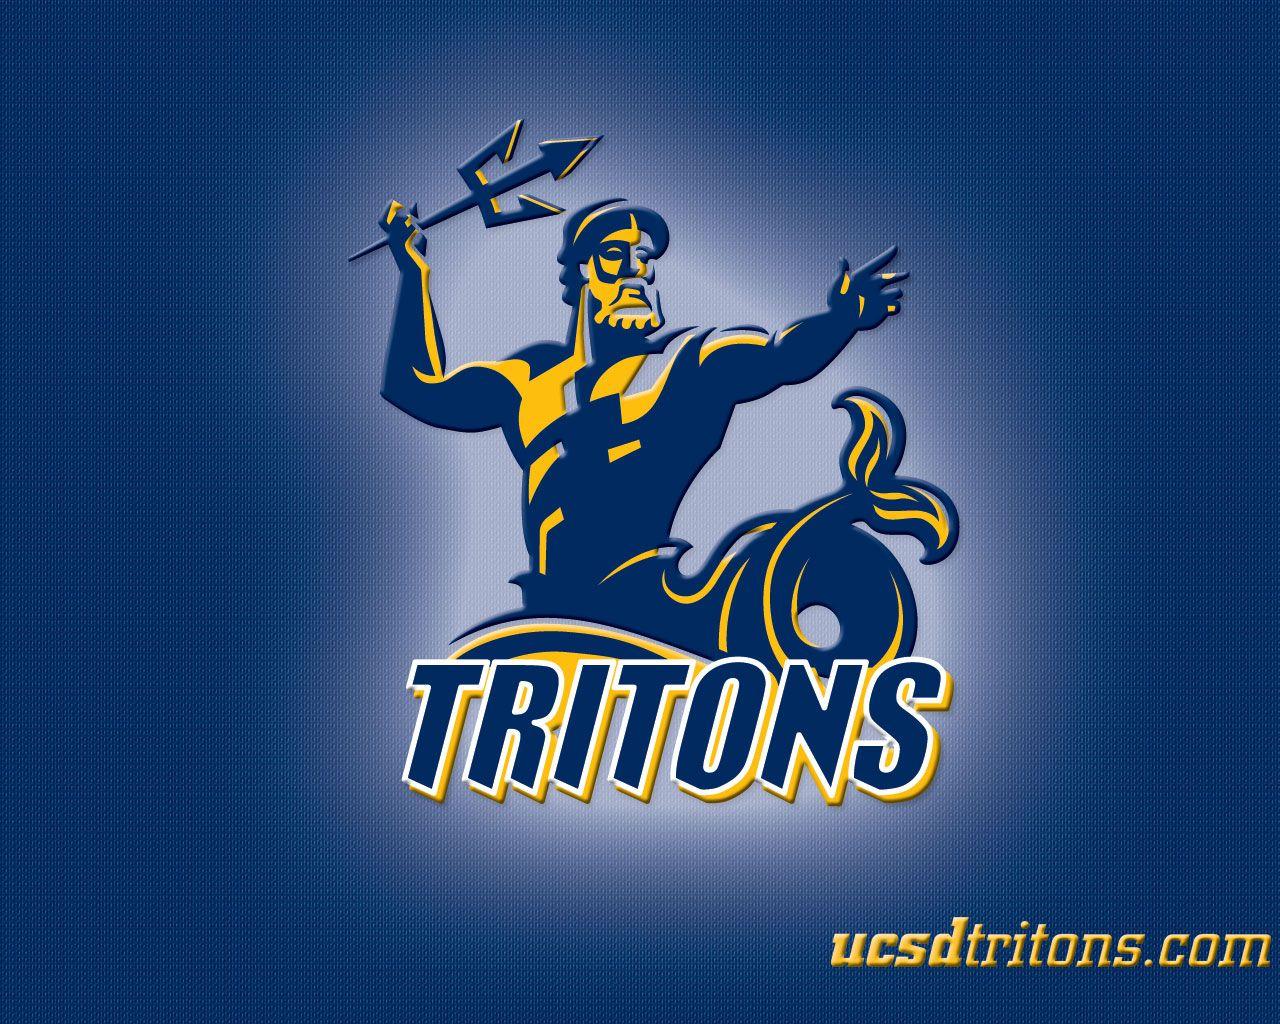 UC San Diego Tritons One Step Closer to Division 1 Status